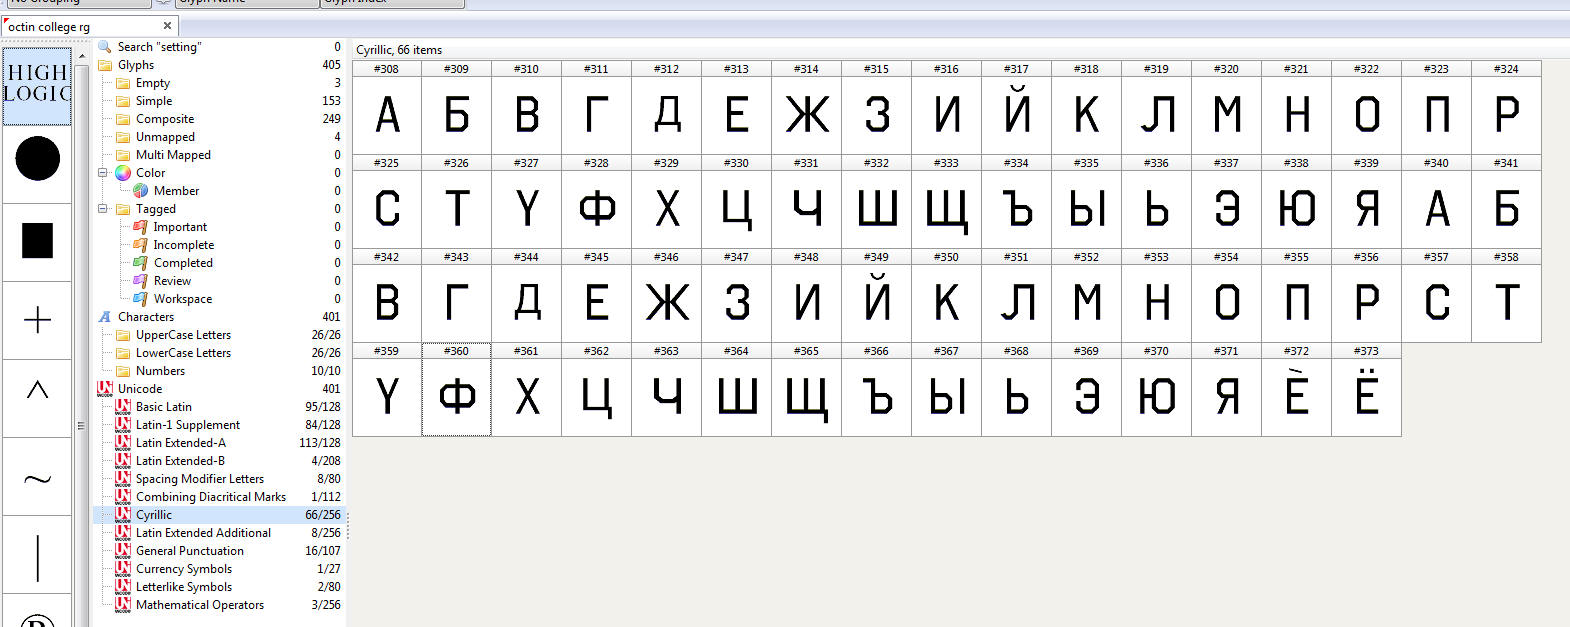 That's the overview of the Cyrillic characters